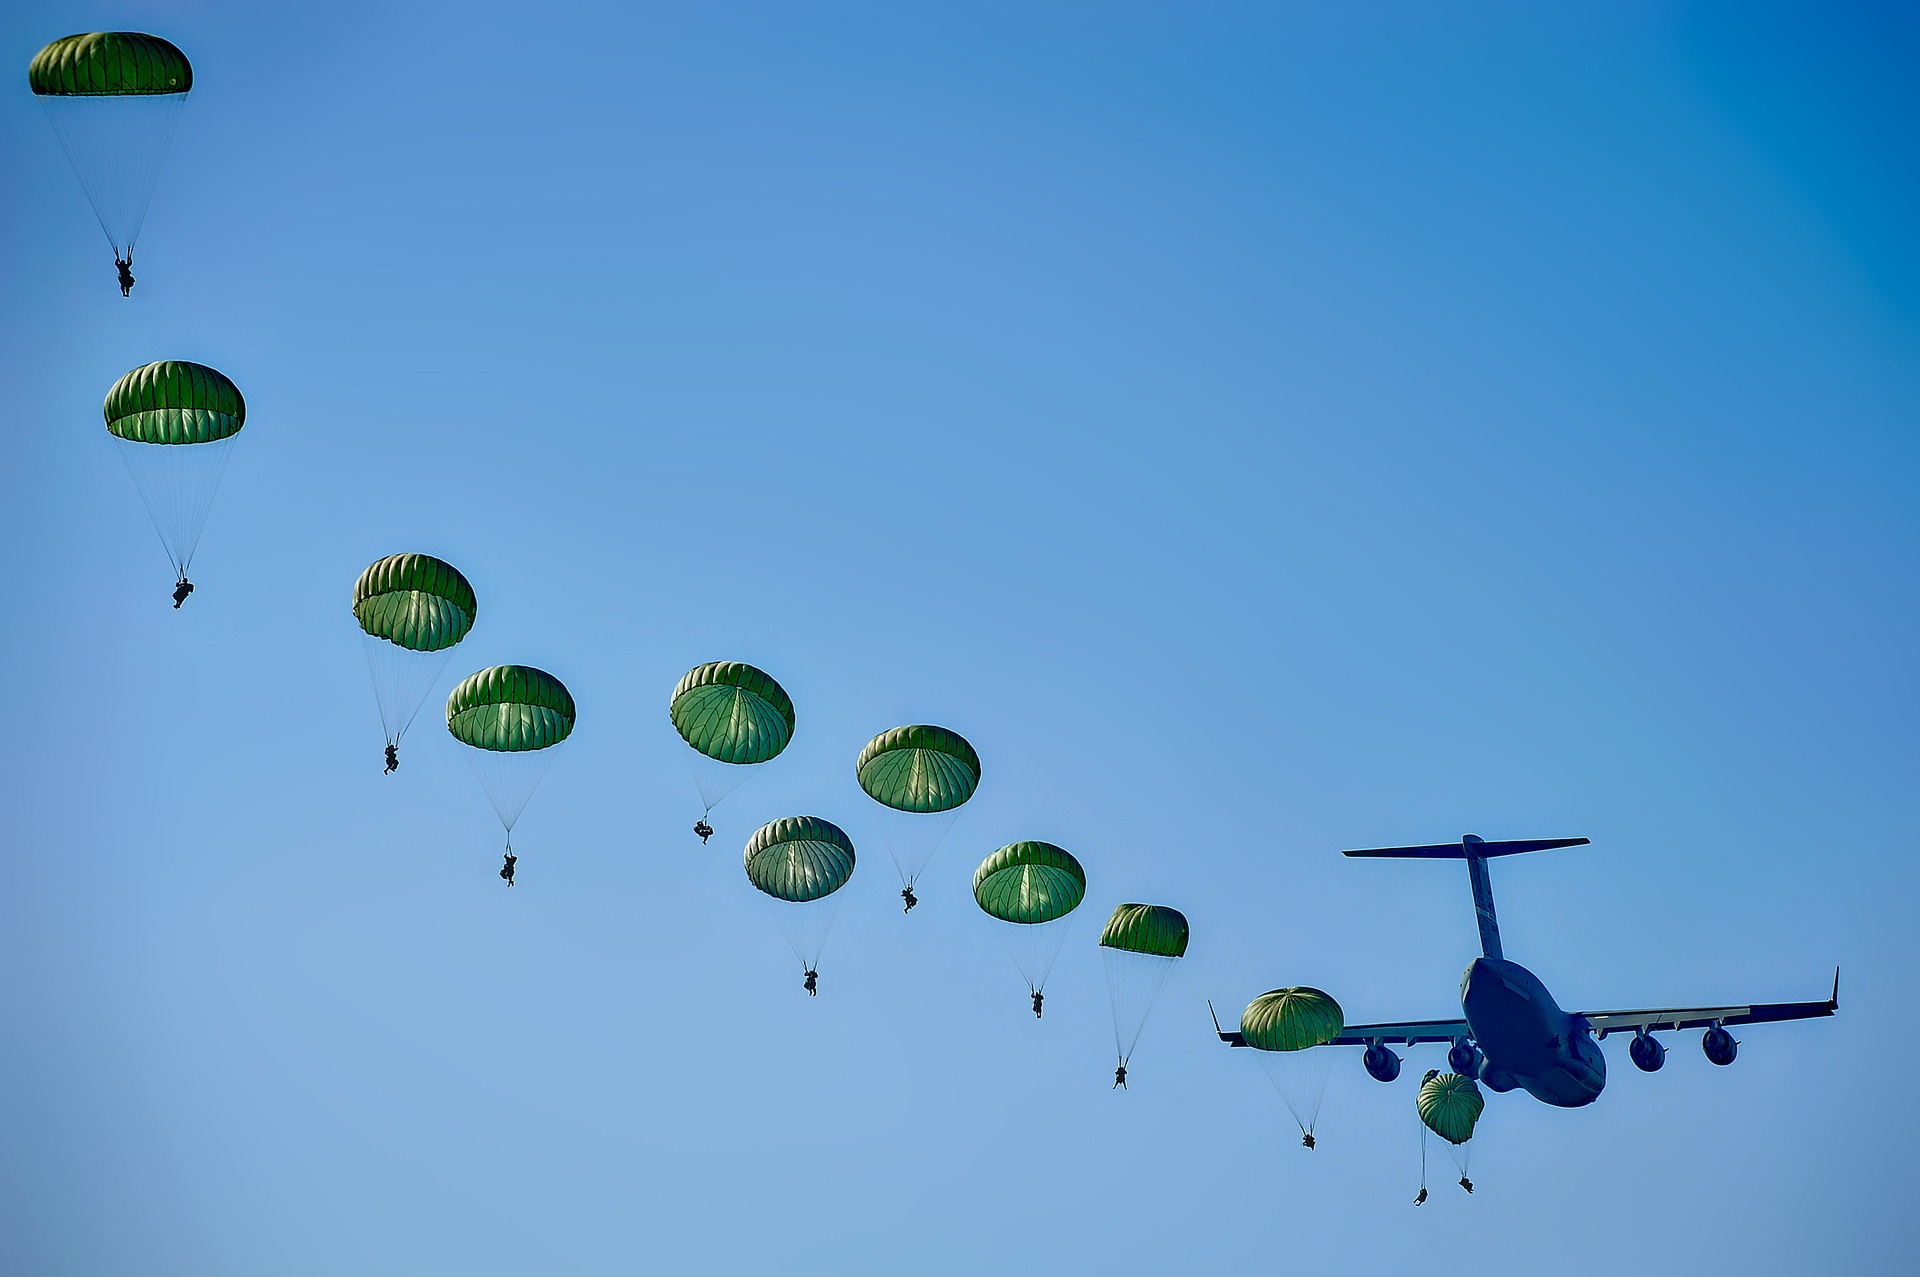 A group of militray paratroopers jumping from a plane